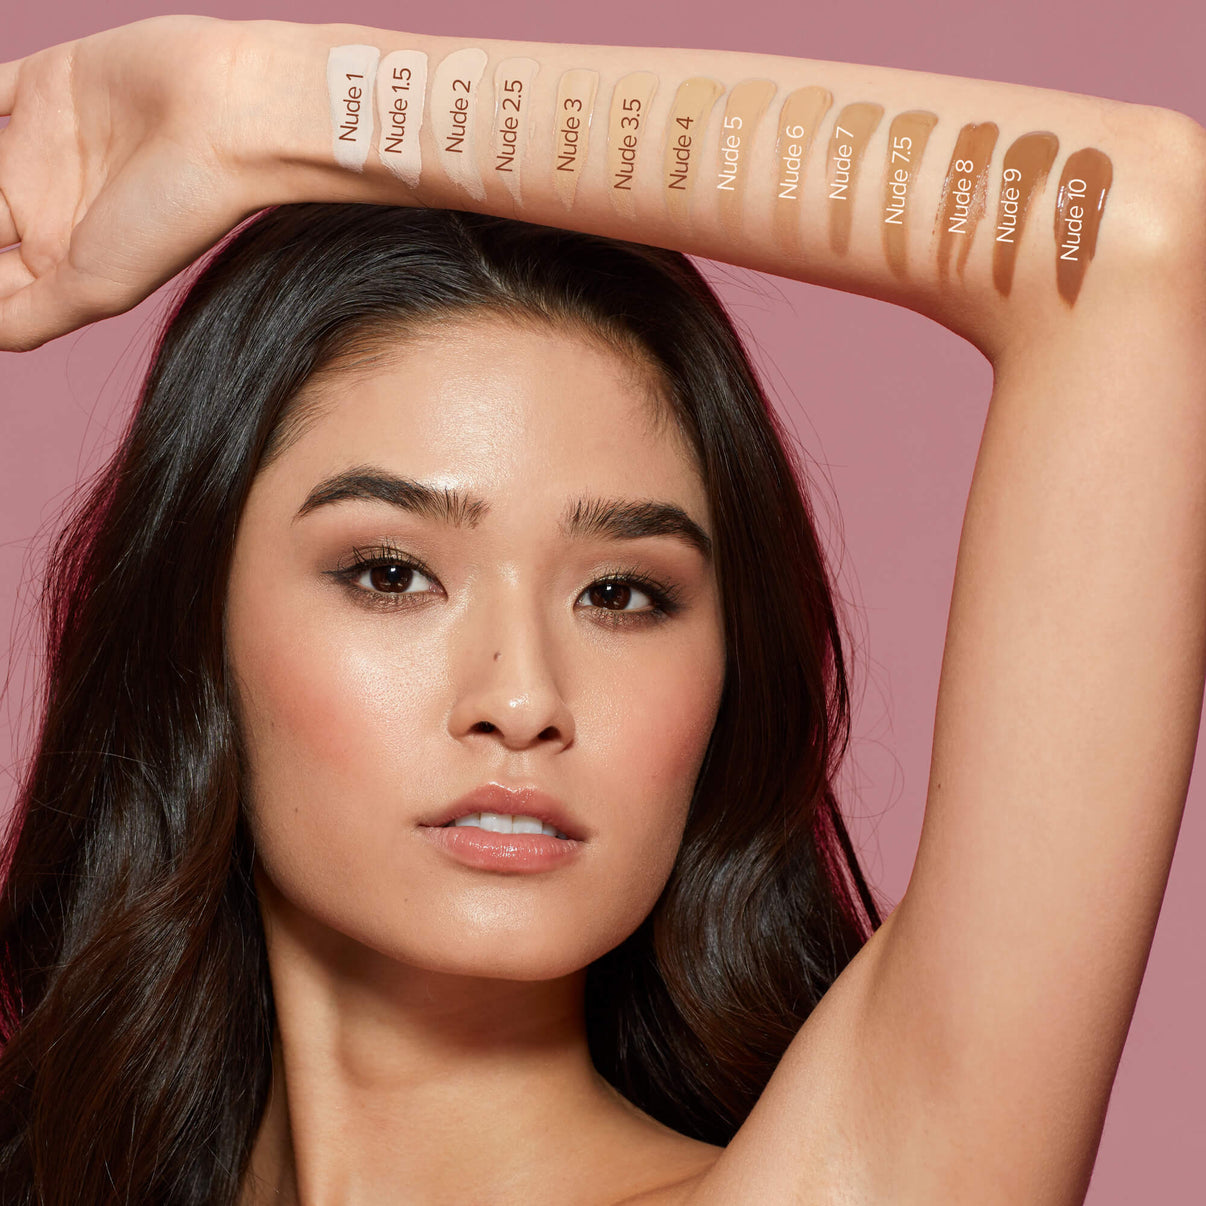 Young woman with arm swatches of Tinted Cover nude 10 and other shades